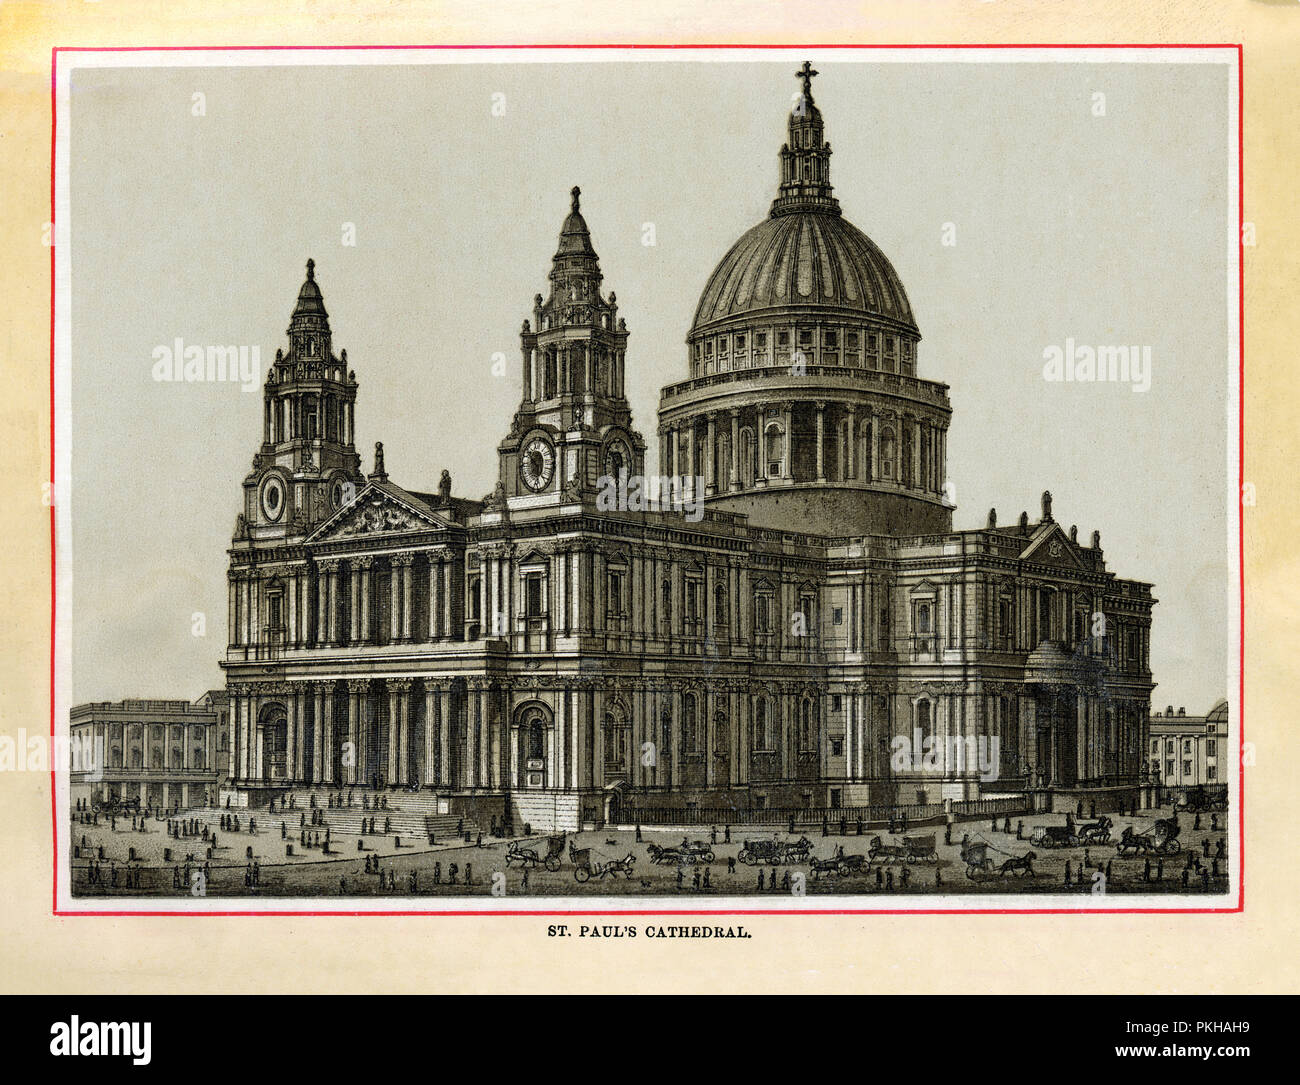 St Paul’s Cathedral, 1880 high quality steel engraving of the church built by Christopher Wren and finished in 1715 after the Great Fire of London in 1666 destroyed the Medieval building Stock Photo